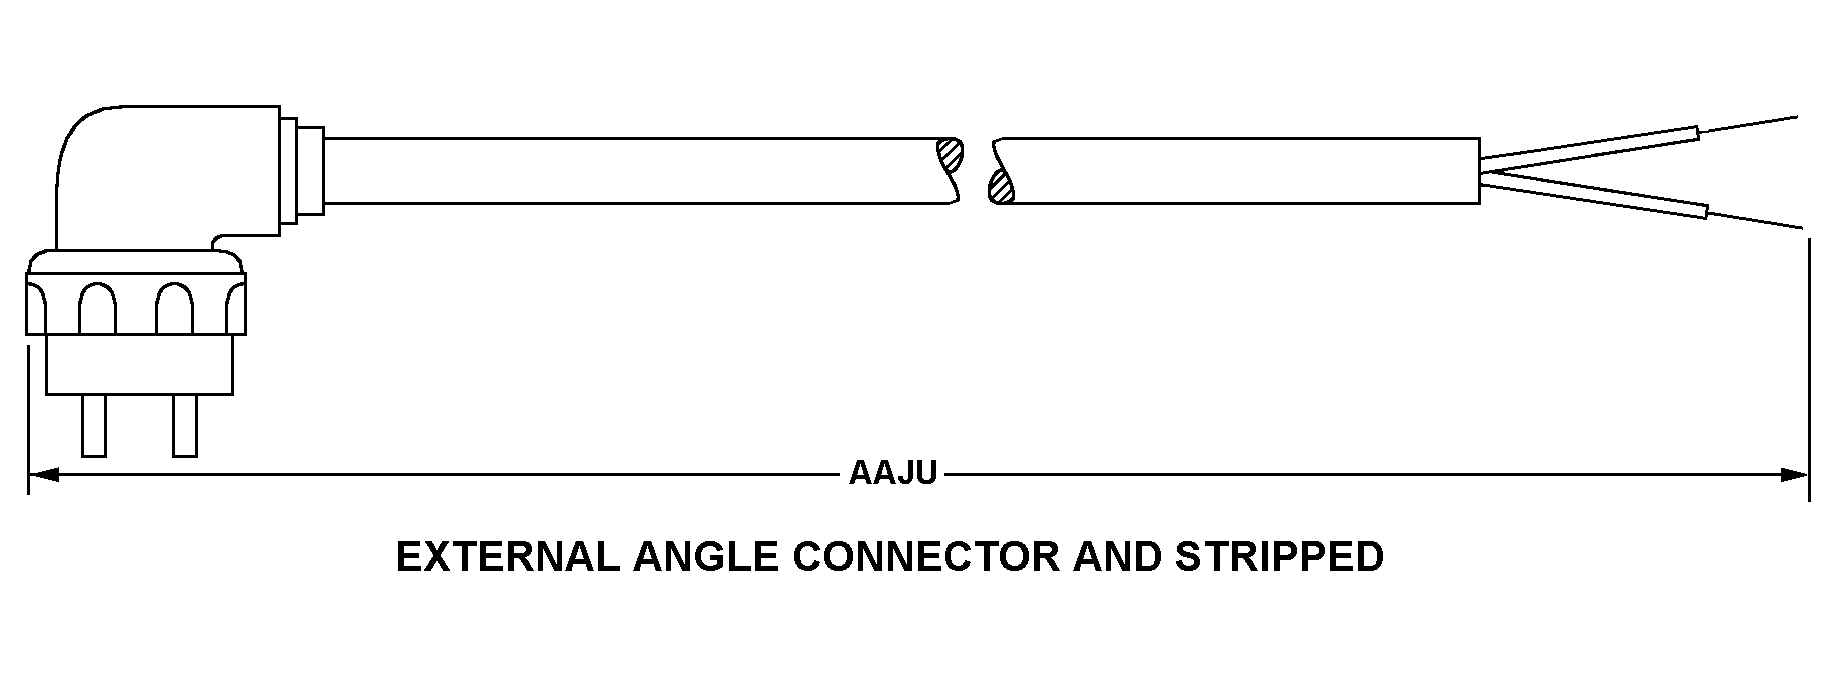 EXTERNAL ANGLE CONNECTOR AND STRIPPED style nsn 5995-01-122-4261